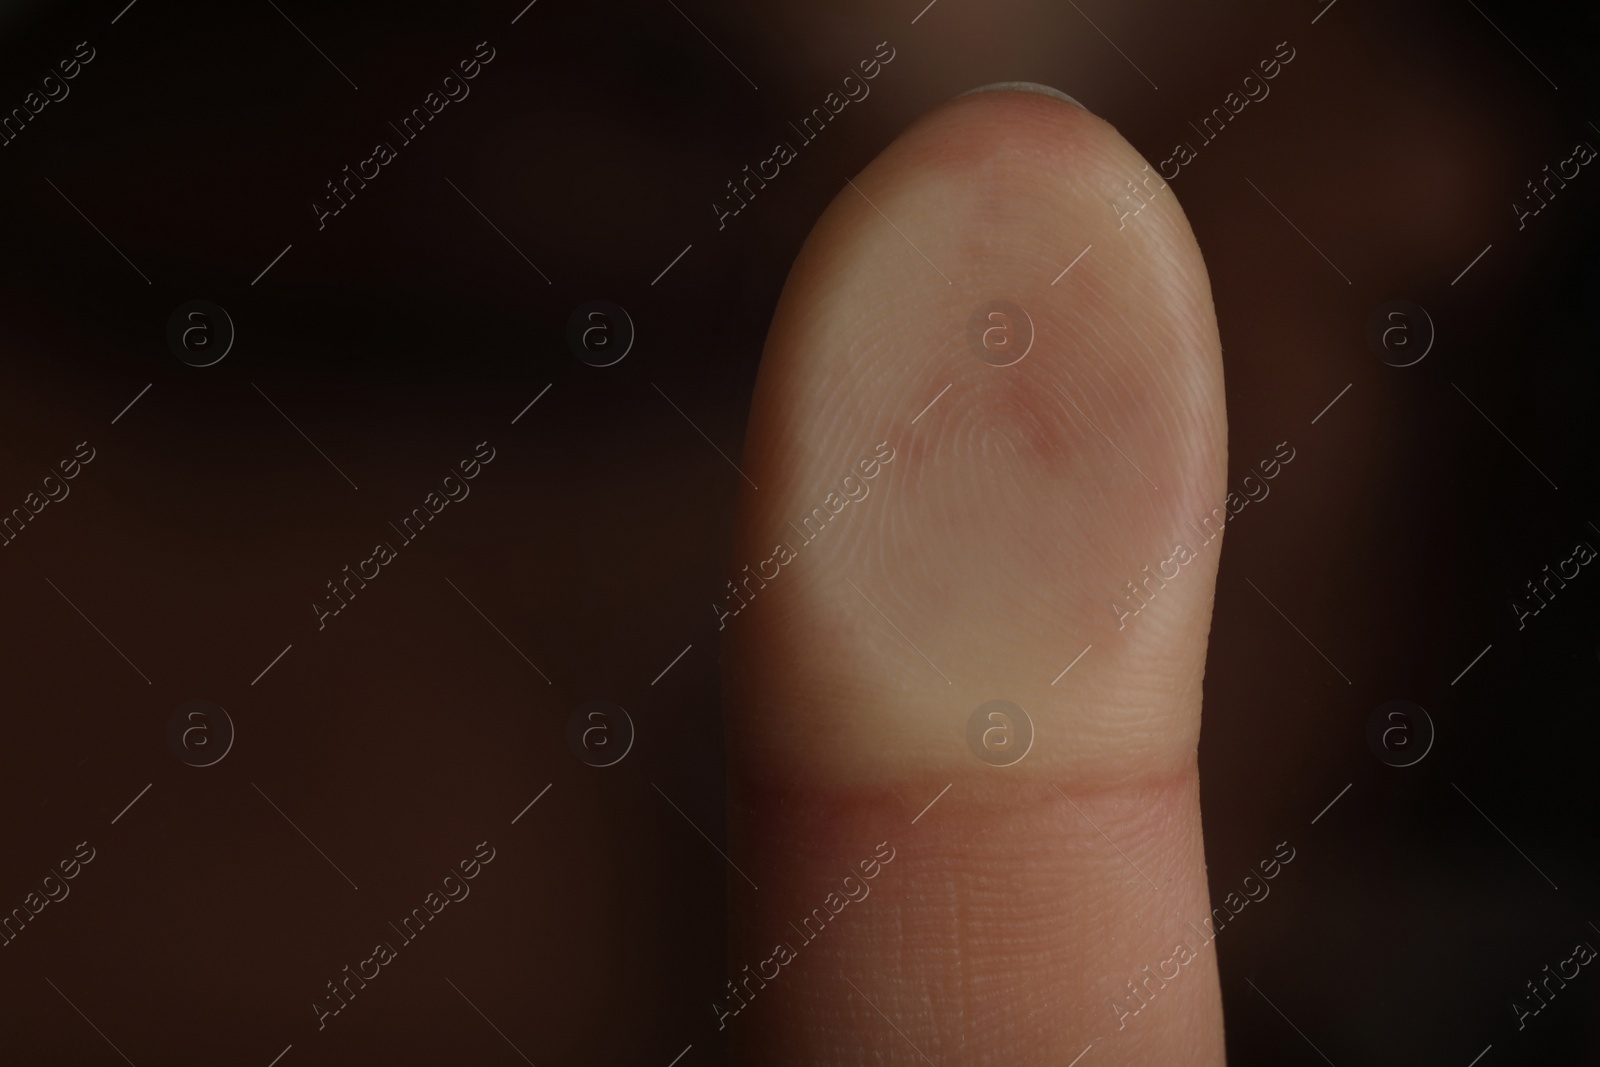 Photo of Woman pressing finger to surface, closeup view. Scanning fingerprint